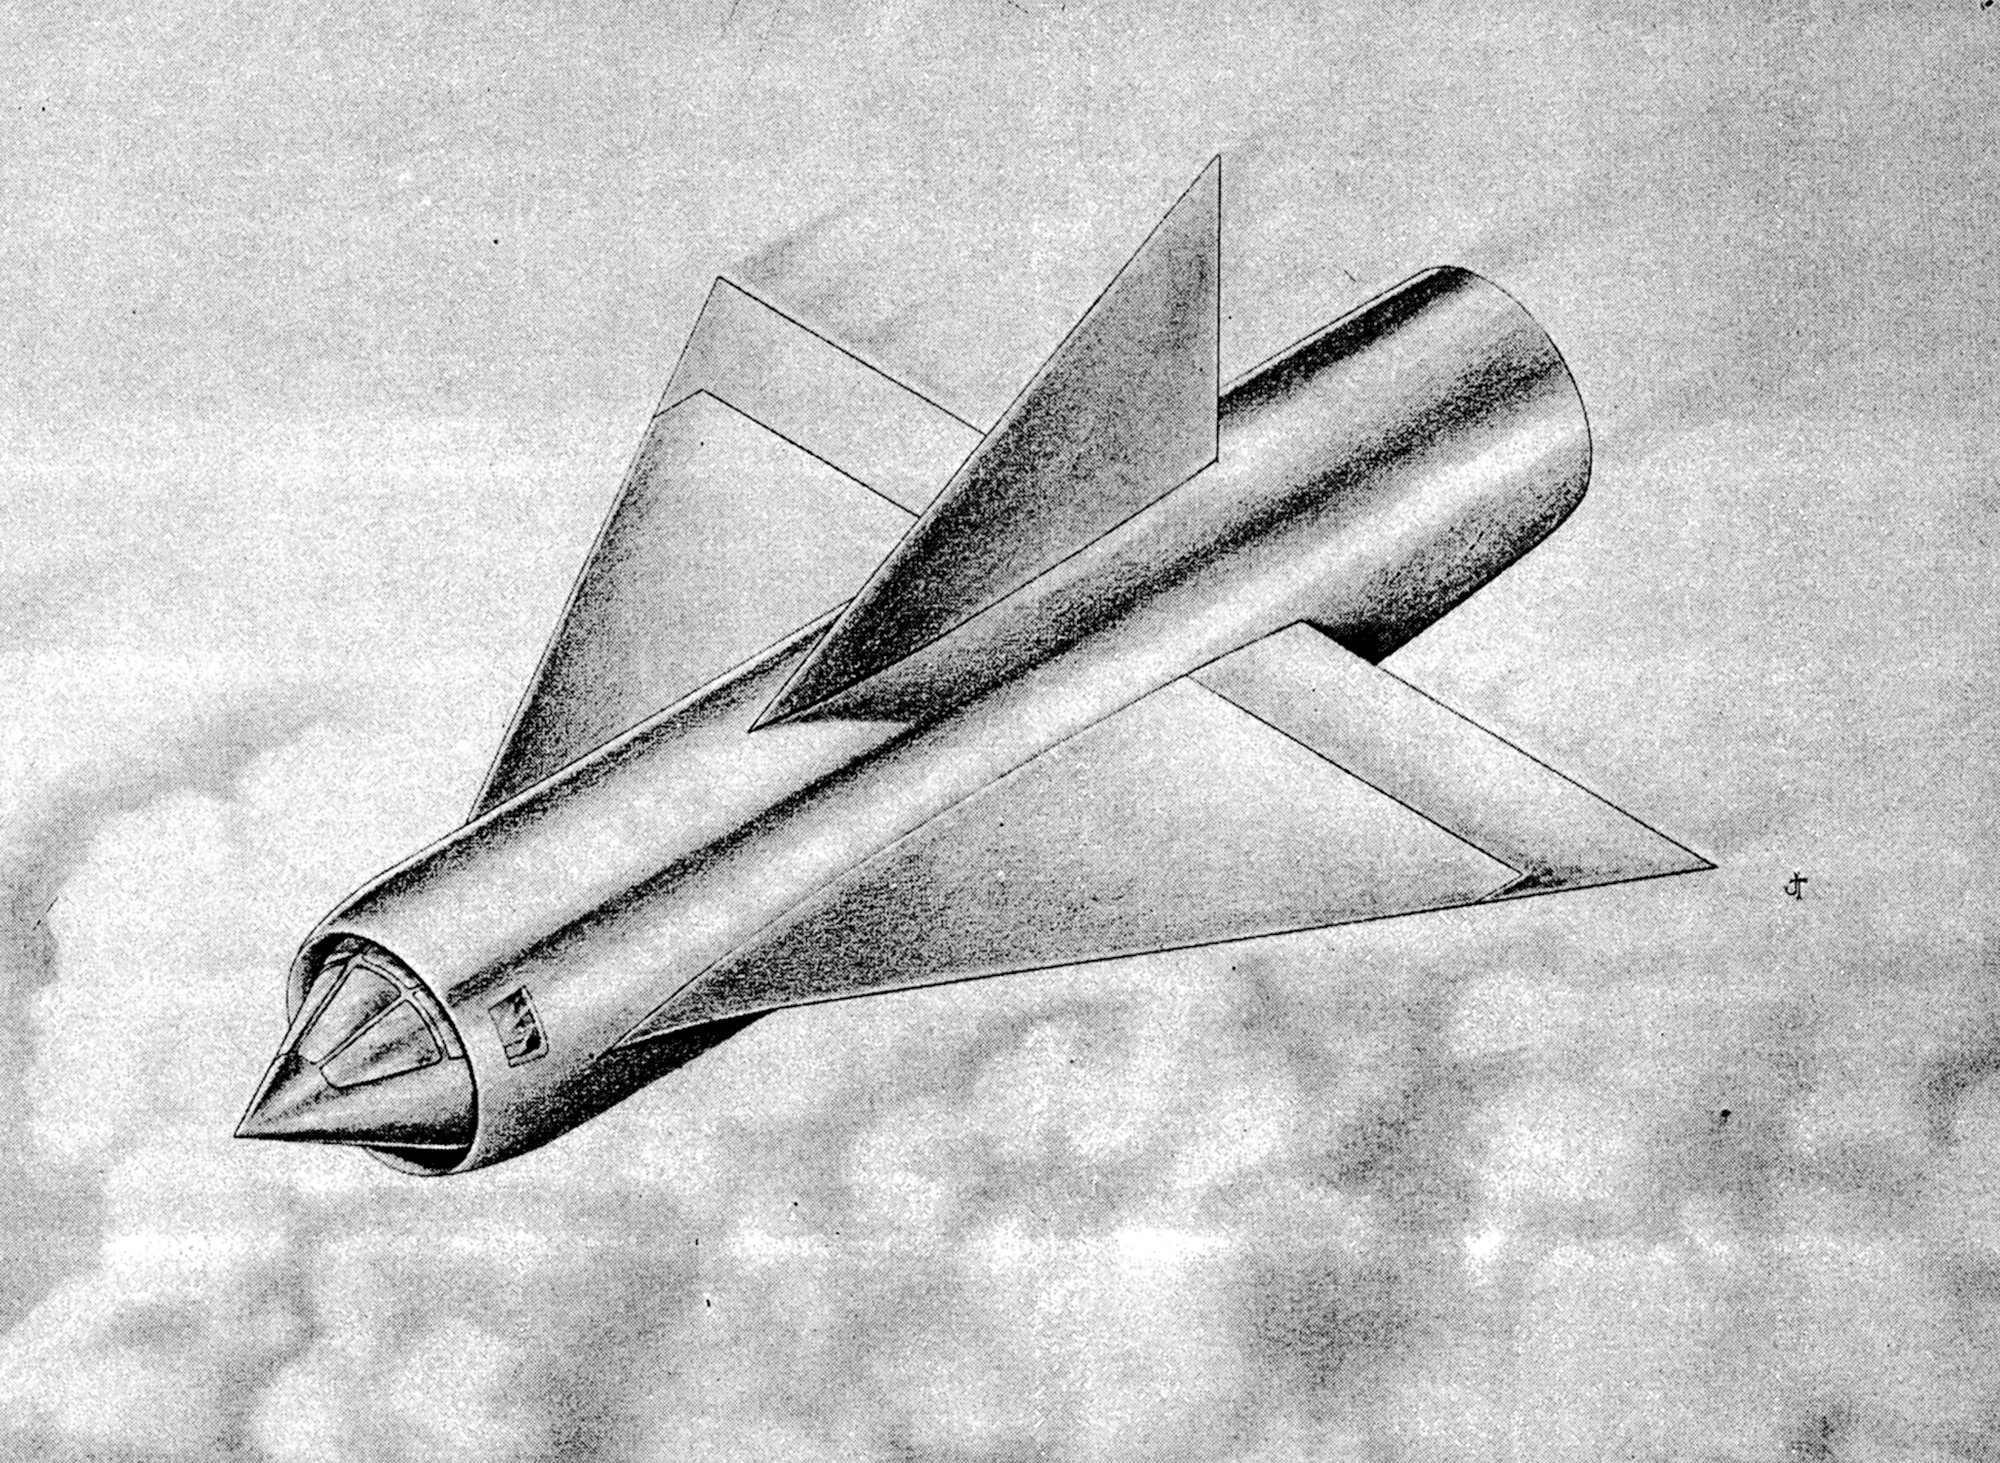 Early illustration of the ramjet-powered XP-92 (In 1948, the Air Force changed the designation from “P” for pursuit to “F” for fighter). (U.S. Air Force photo)